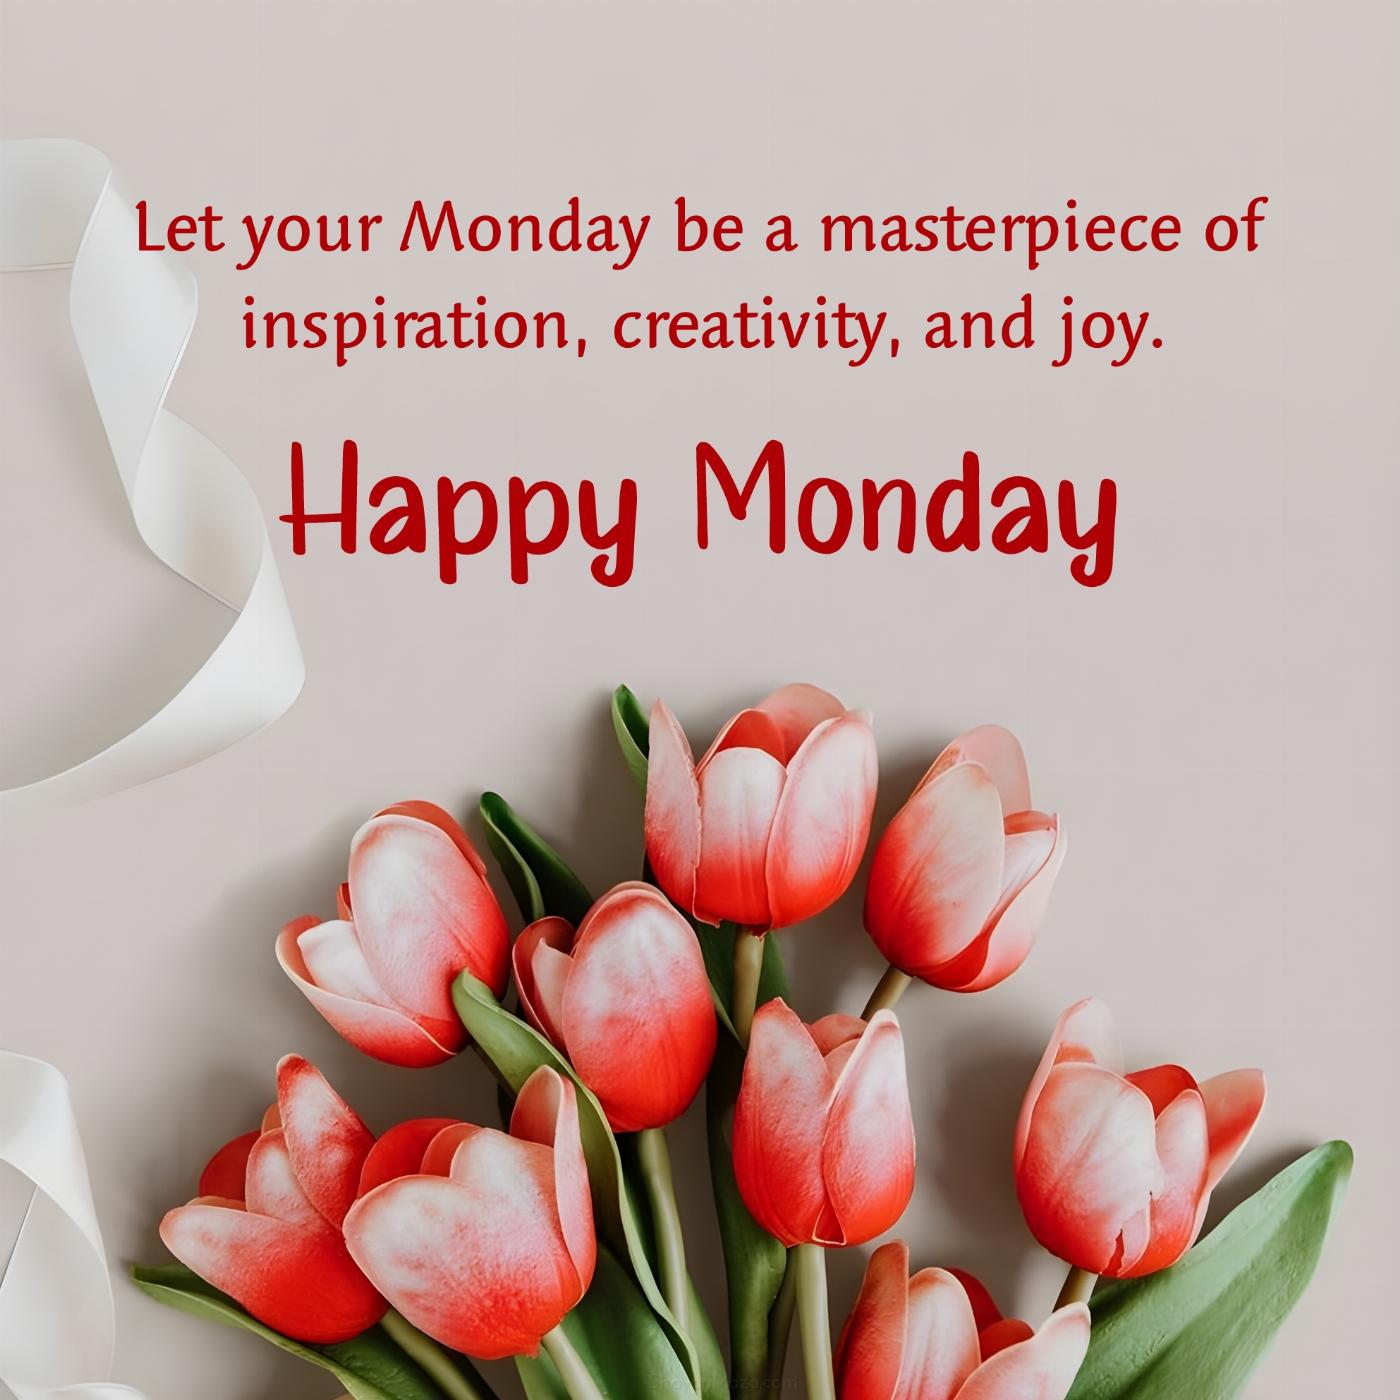 Let your Monday be a masterpiece of inspiration